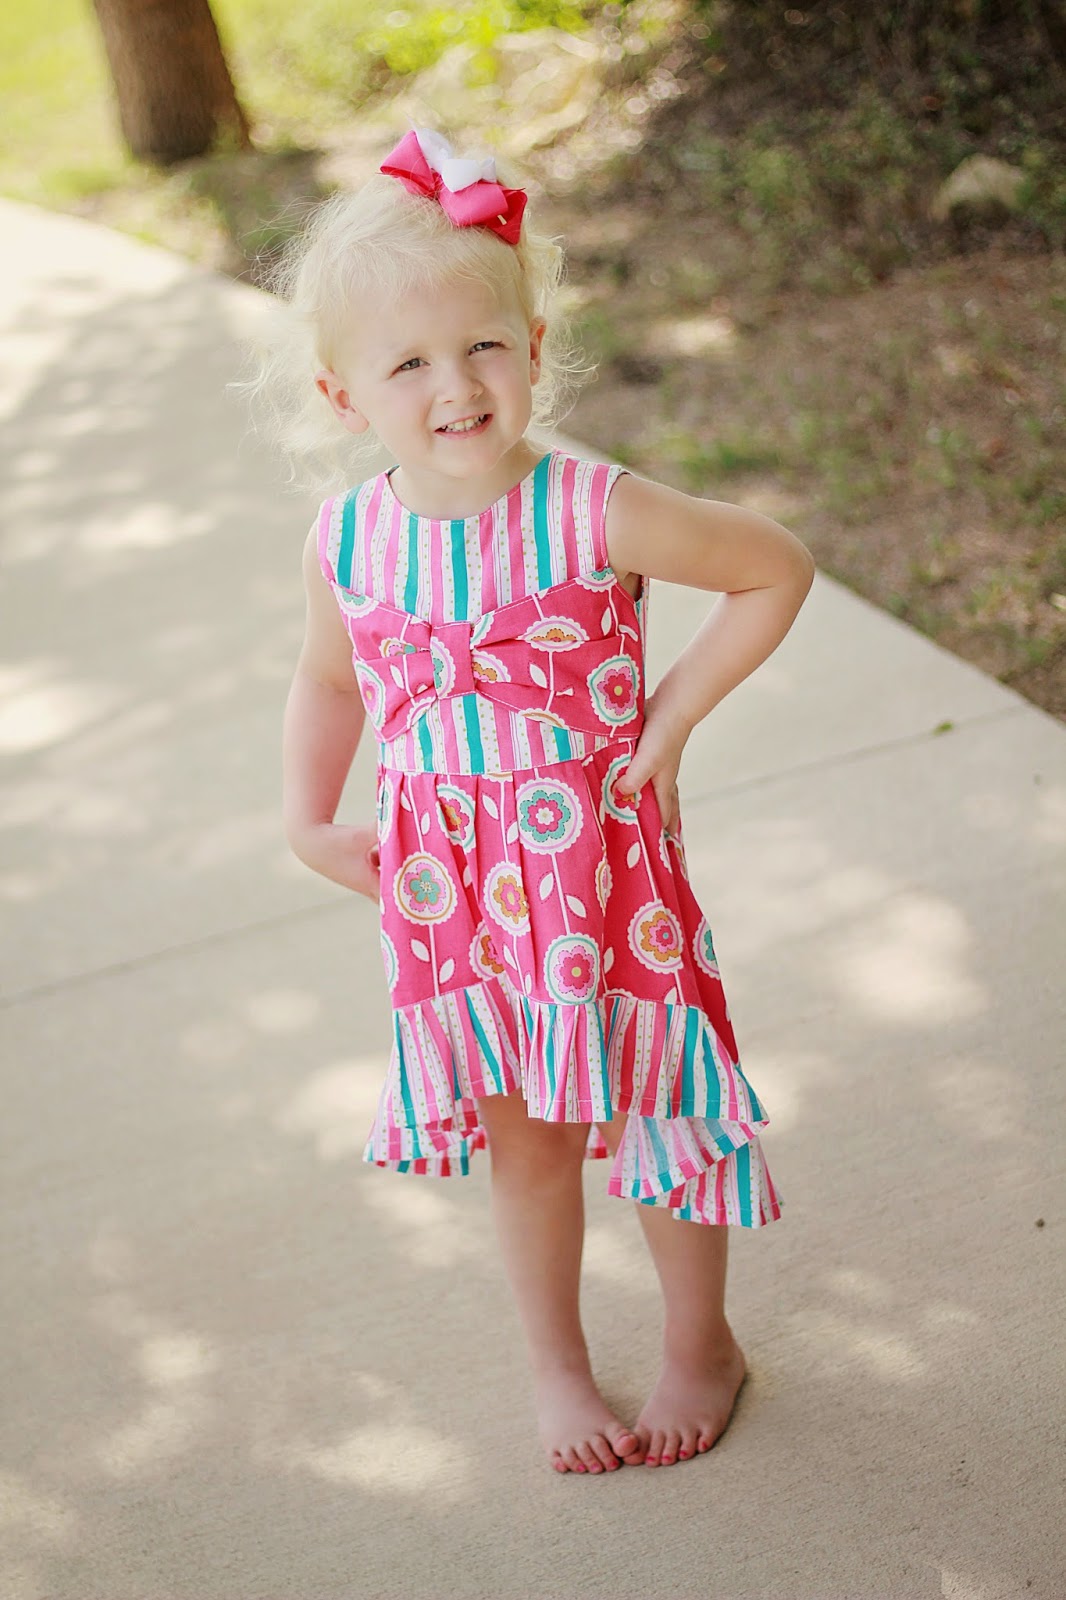 Sewing Patterns for Girls Dresses and Skirts: High-Low Top/Dress Sewing ...